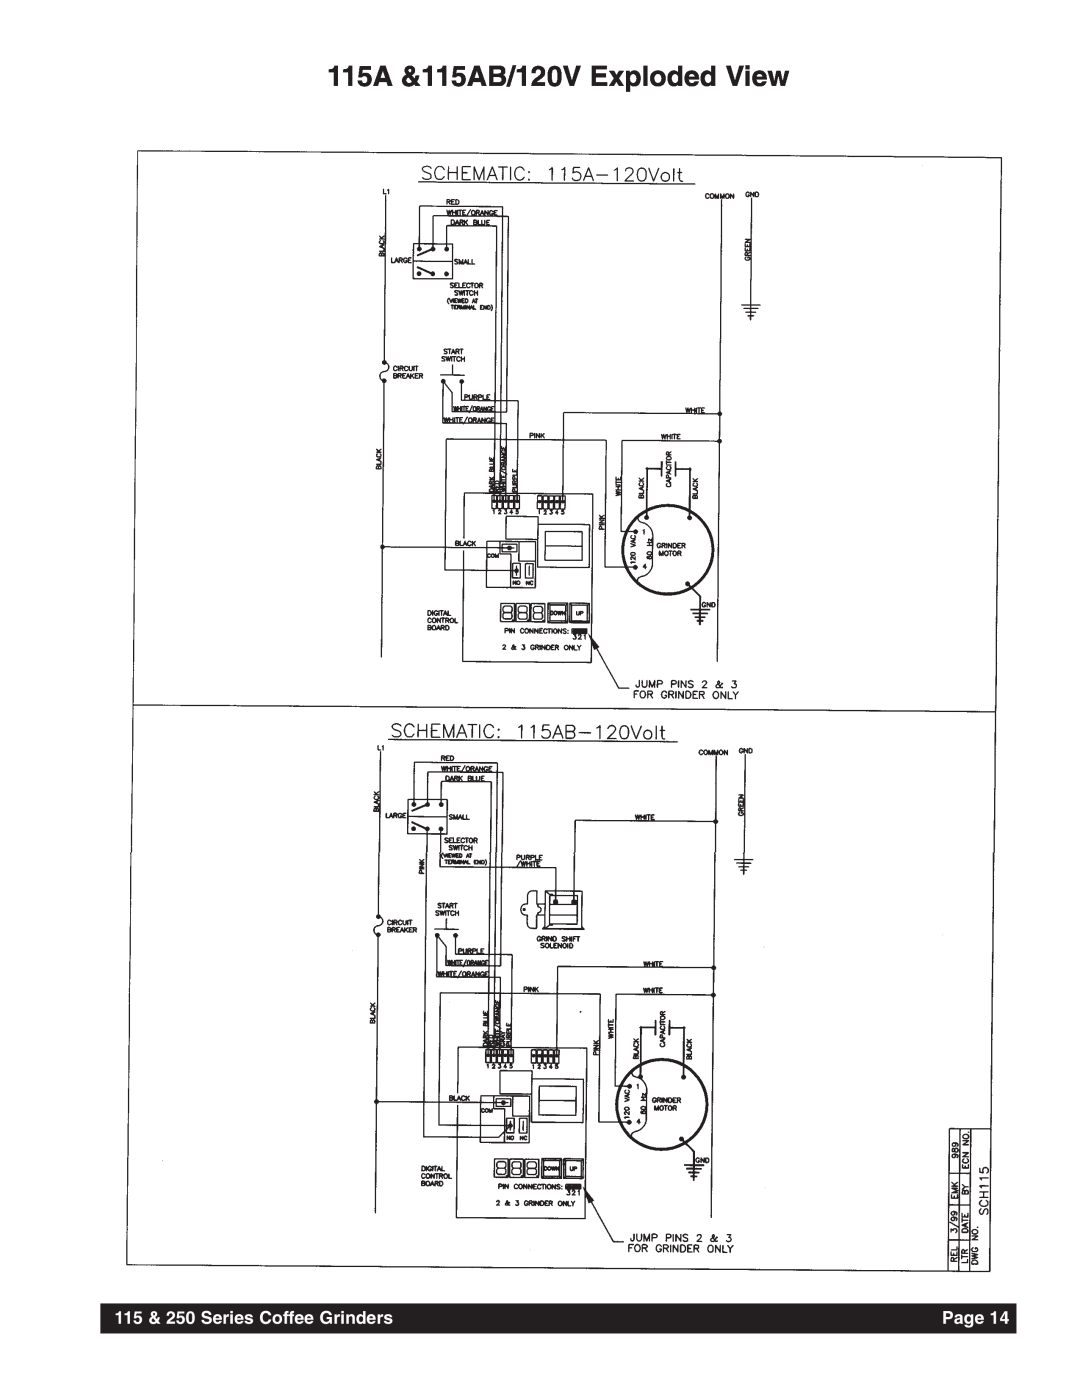 Grindmaster instruction manual 115A &115AB/120V Exploded View, 115 & 250 Series Coffee Grinders, Page 